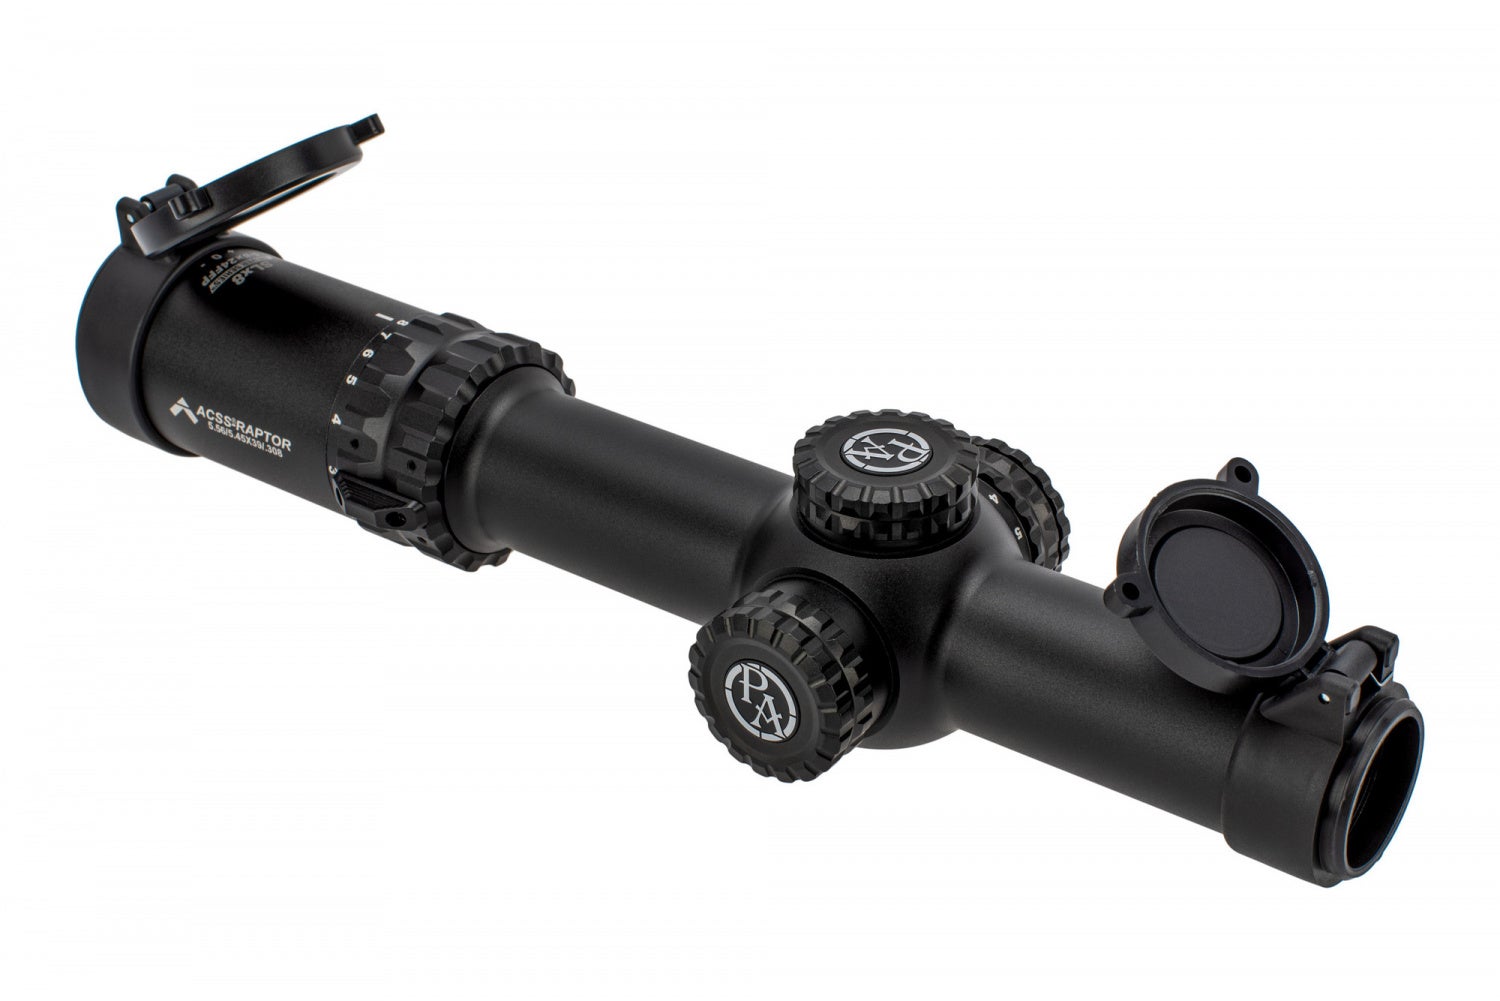 Their popular house-brand optics include products like this SLx 1-8x LPVO.